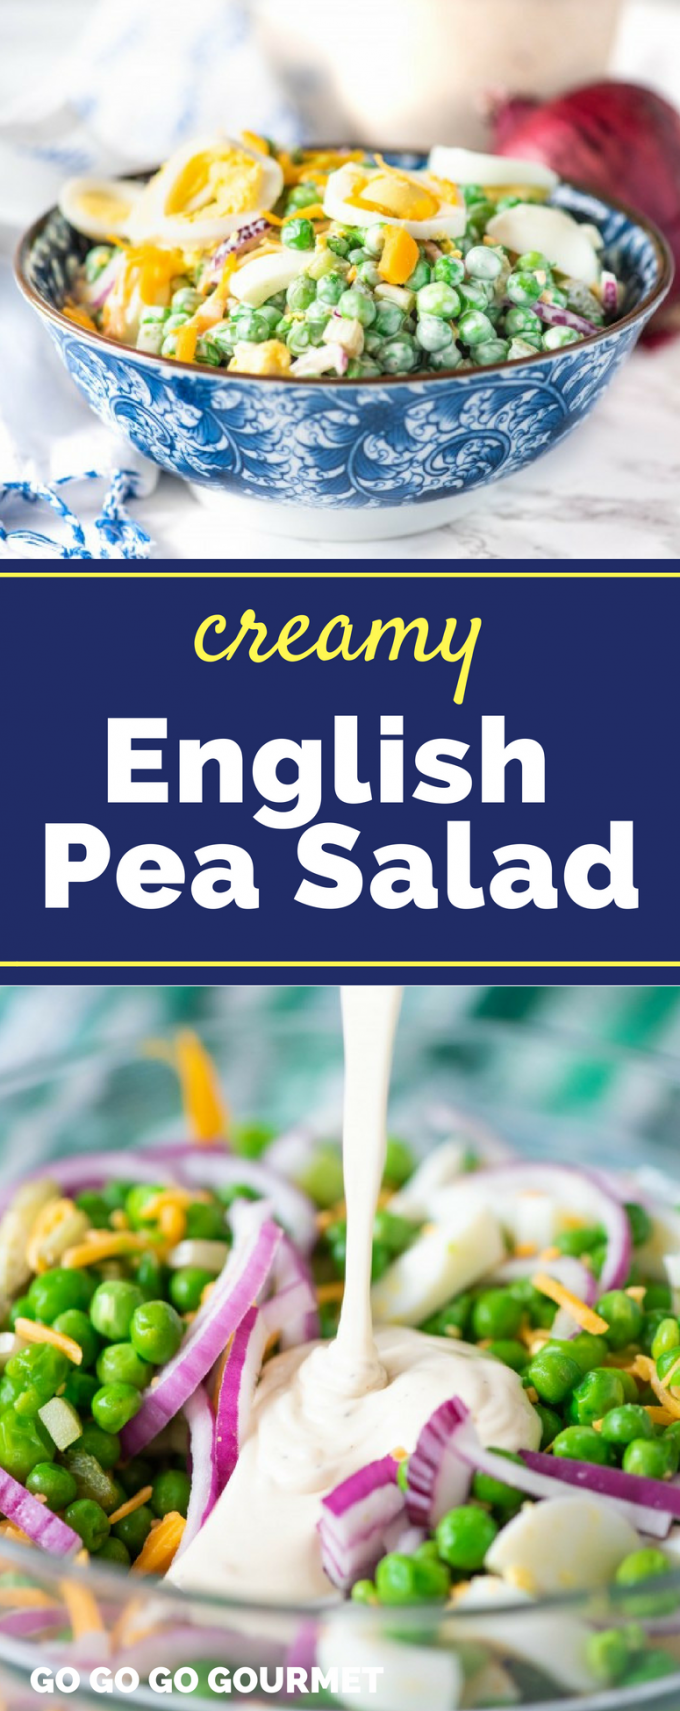 Looking for some new lunch ideas? This easy English Pea Salad is one of the best recipes out there! This pea salad is served cold, so it's perfect for summer BBQs. You can even add some extra flavor with bacon! #peasalad #creamypeasaladrecipes #summerbbqrecipes #gogogogourmet via @gogogogourmet